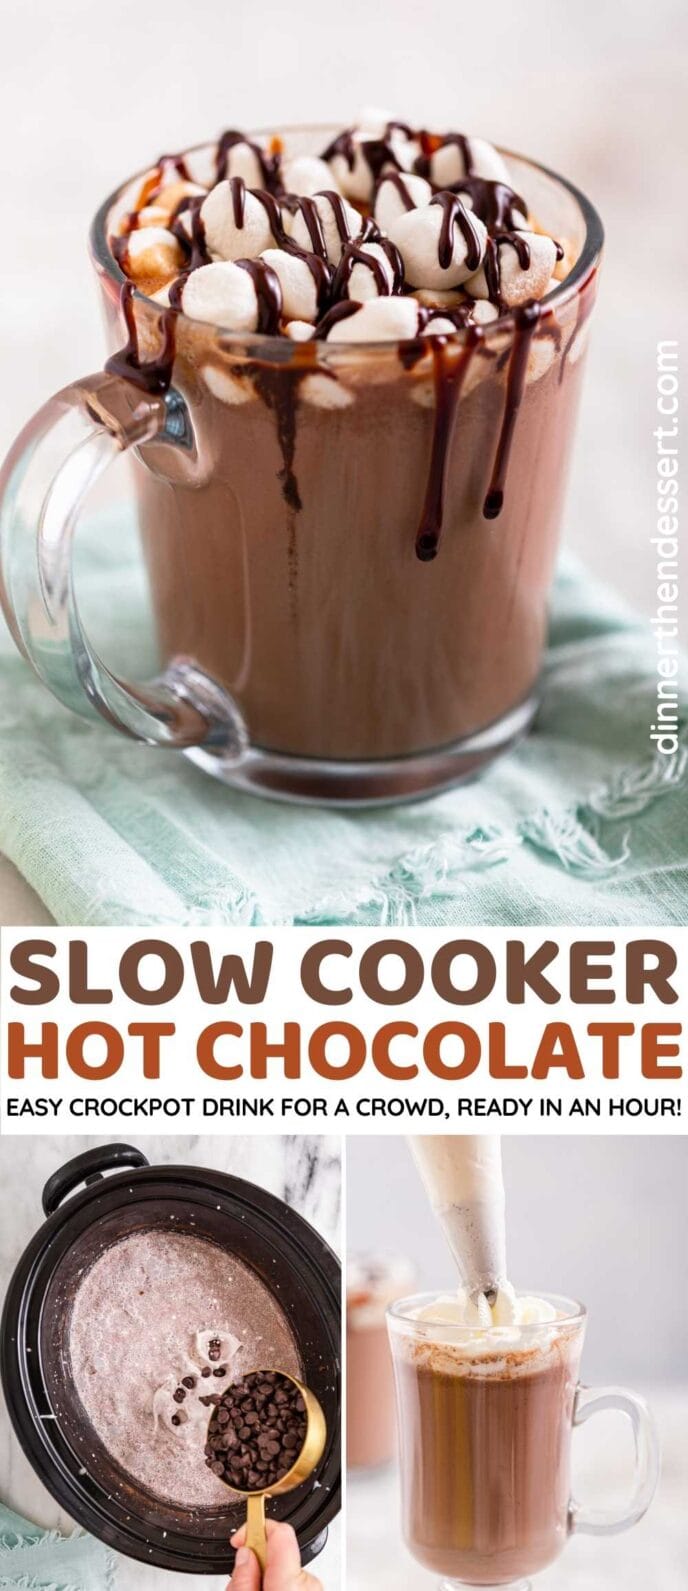 Slow Cooker Hot Chocolate collage